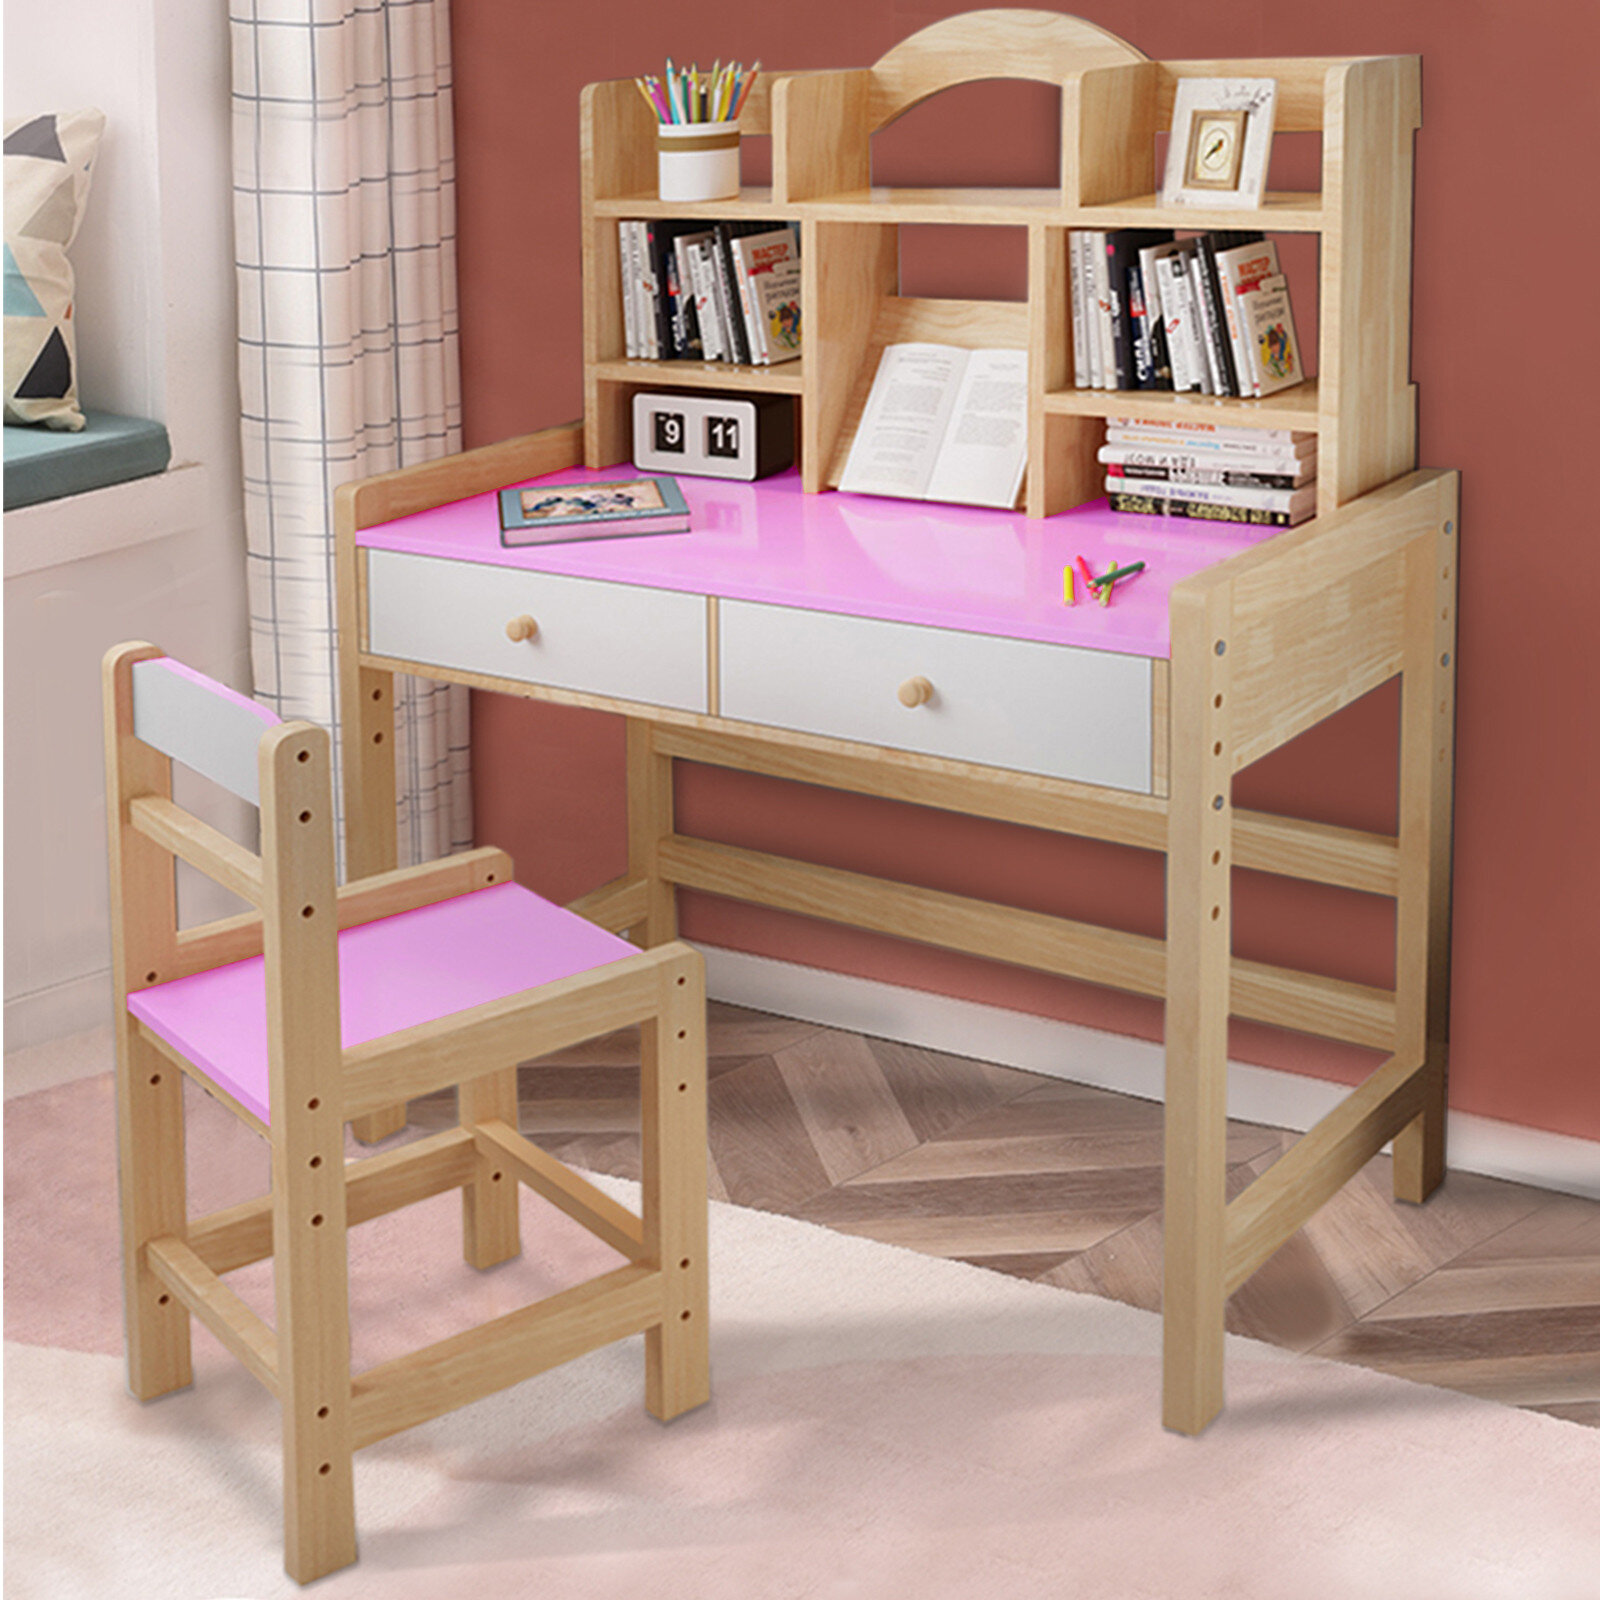 Kids Furniture Height Adjustable Childrens Desk And Chair Set Interactive Workstation Kids Desk And Chair Set Pink 70x46cm Study Table Multifunctional School Students Writing Drawing Desk Furniture